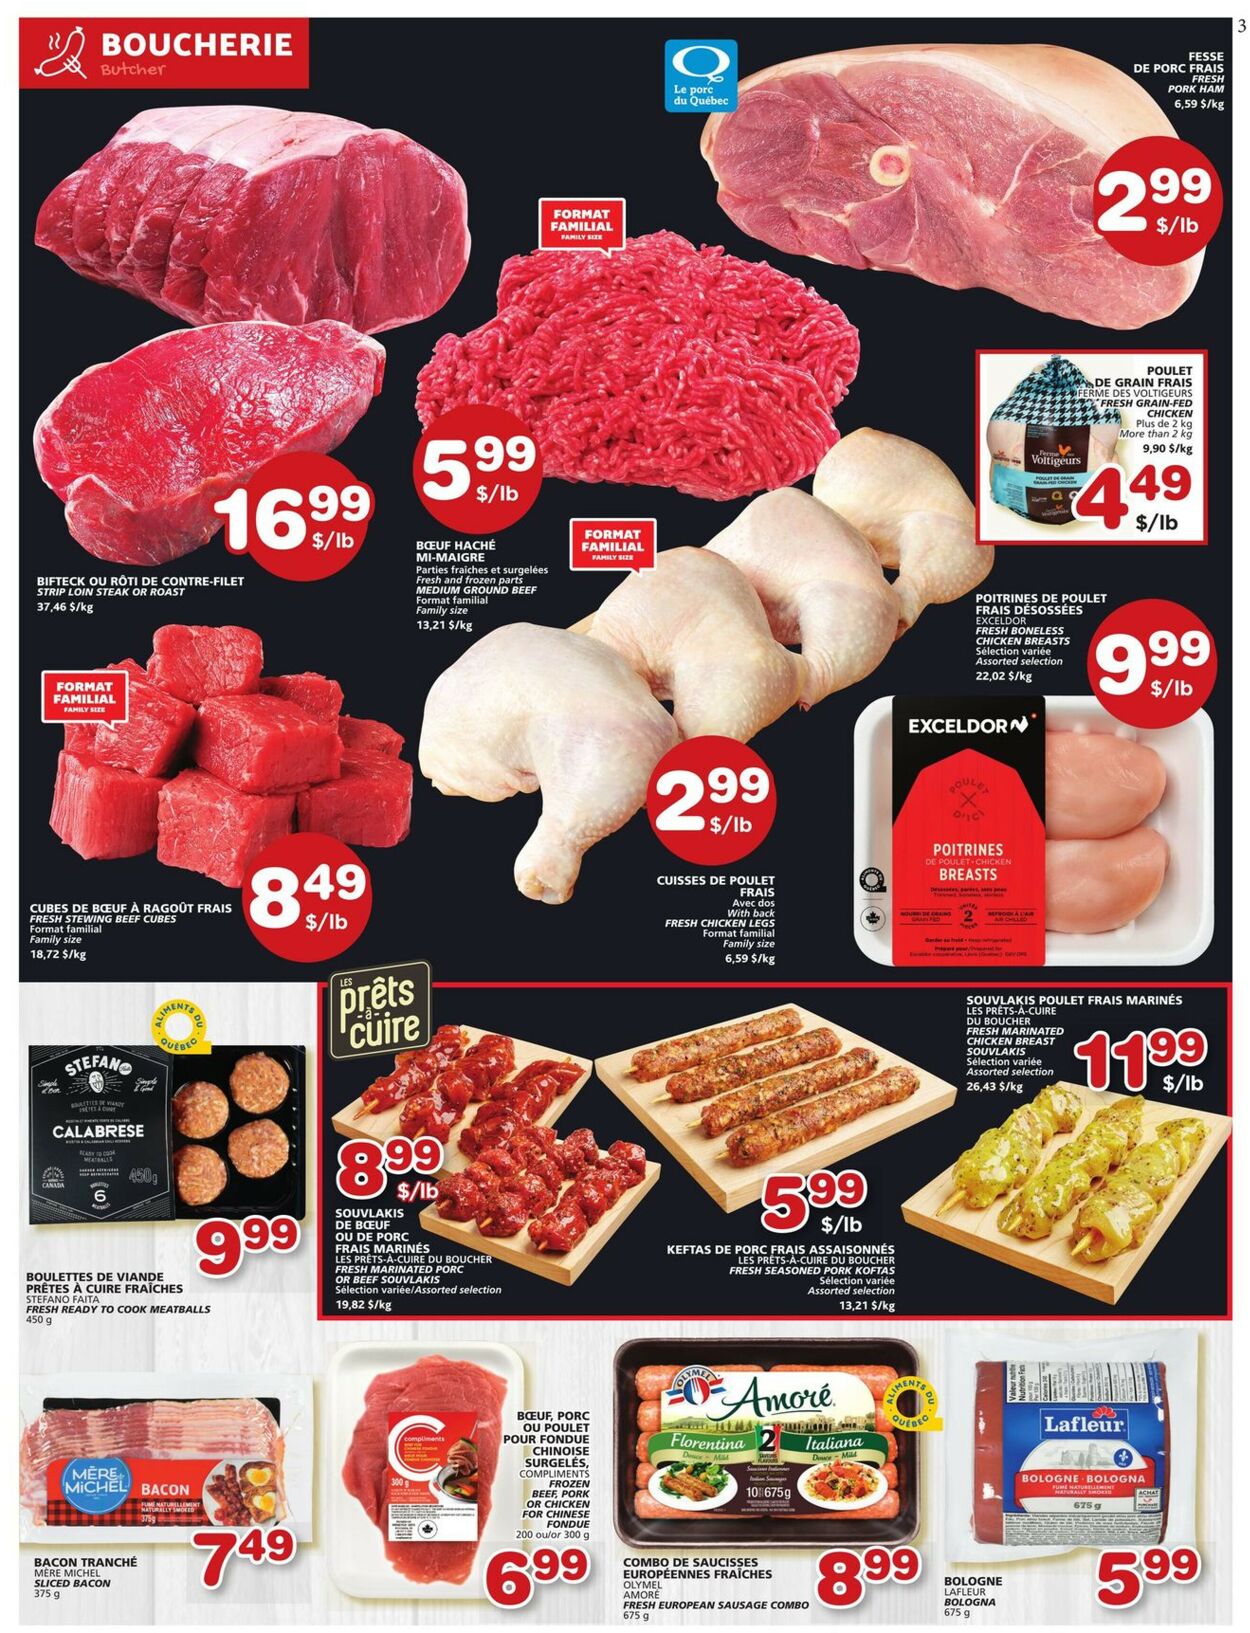 IGA Flyer from 09/22/2022